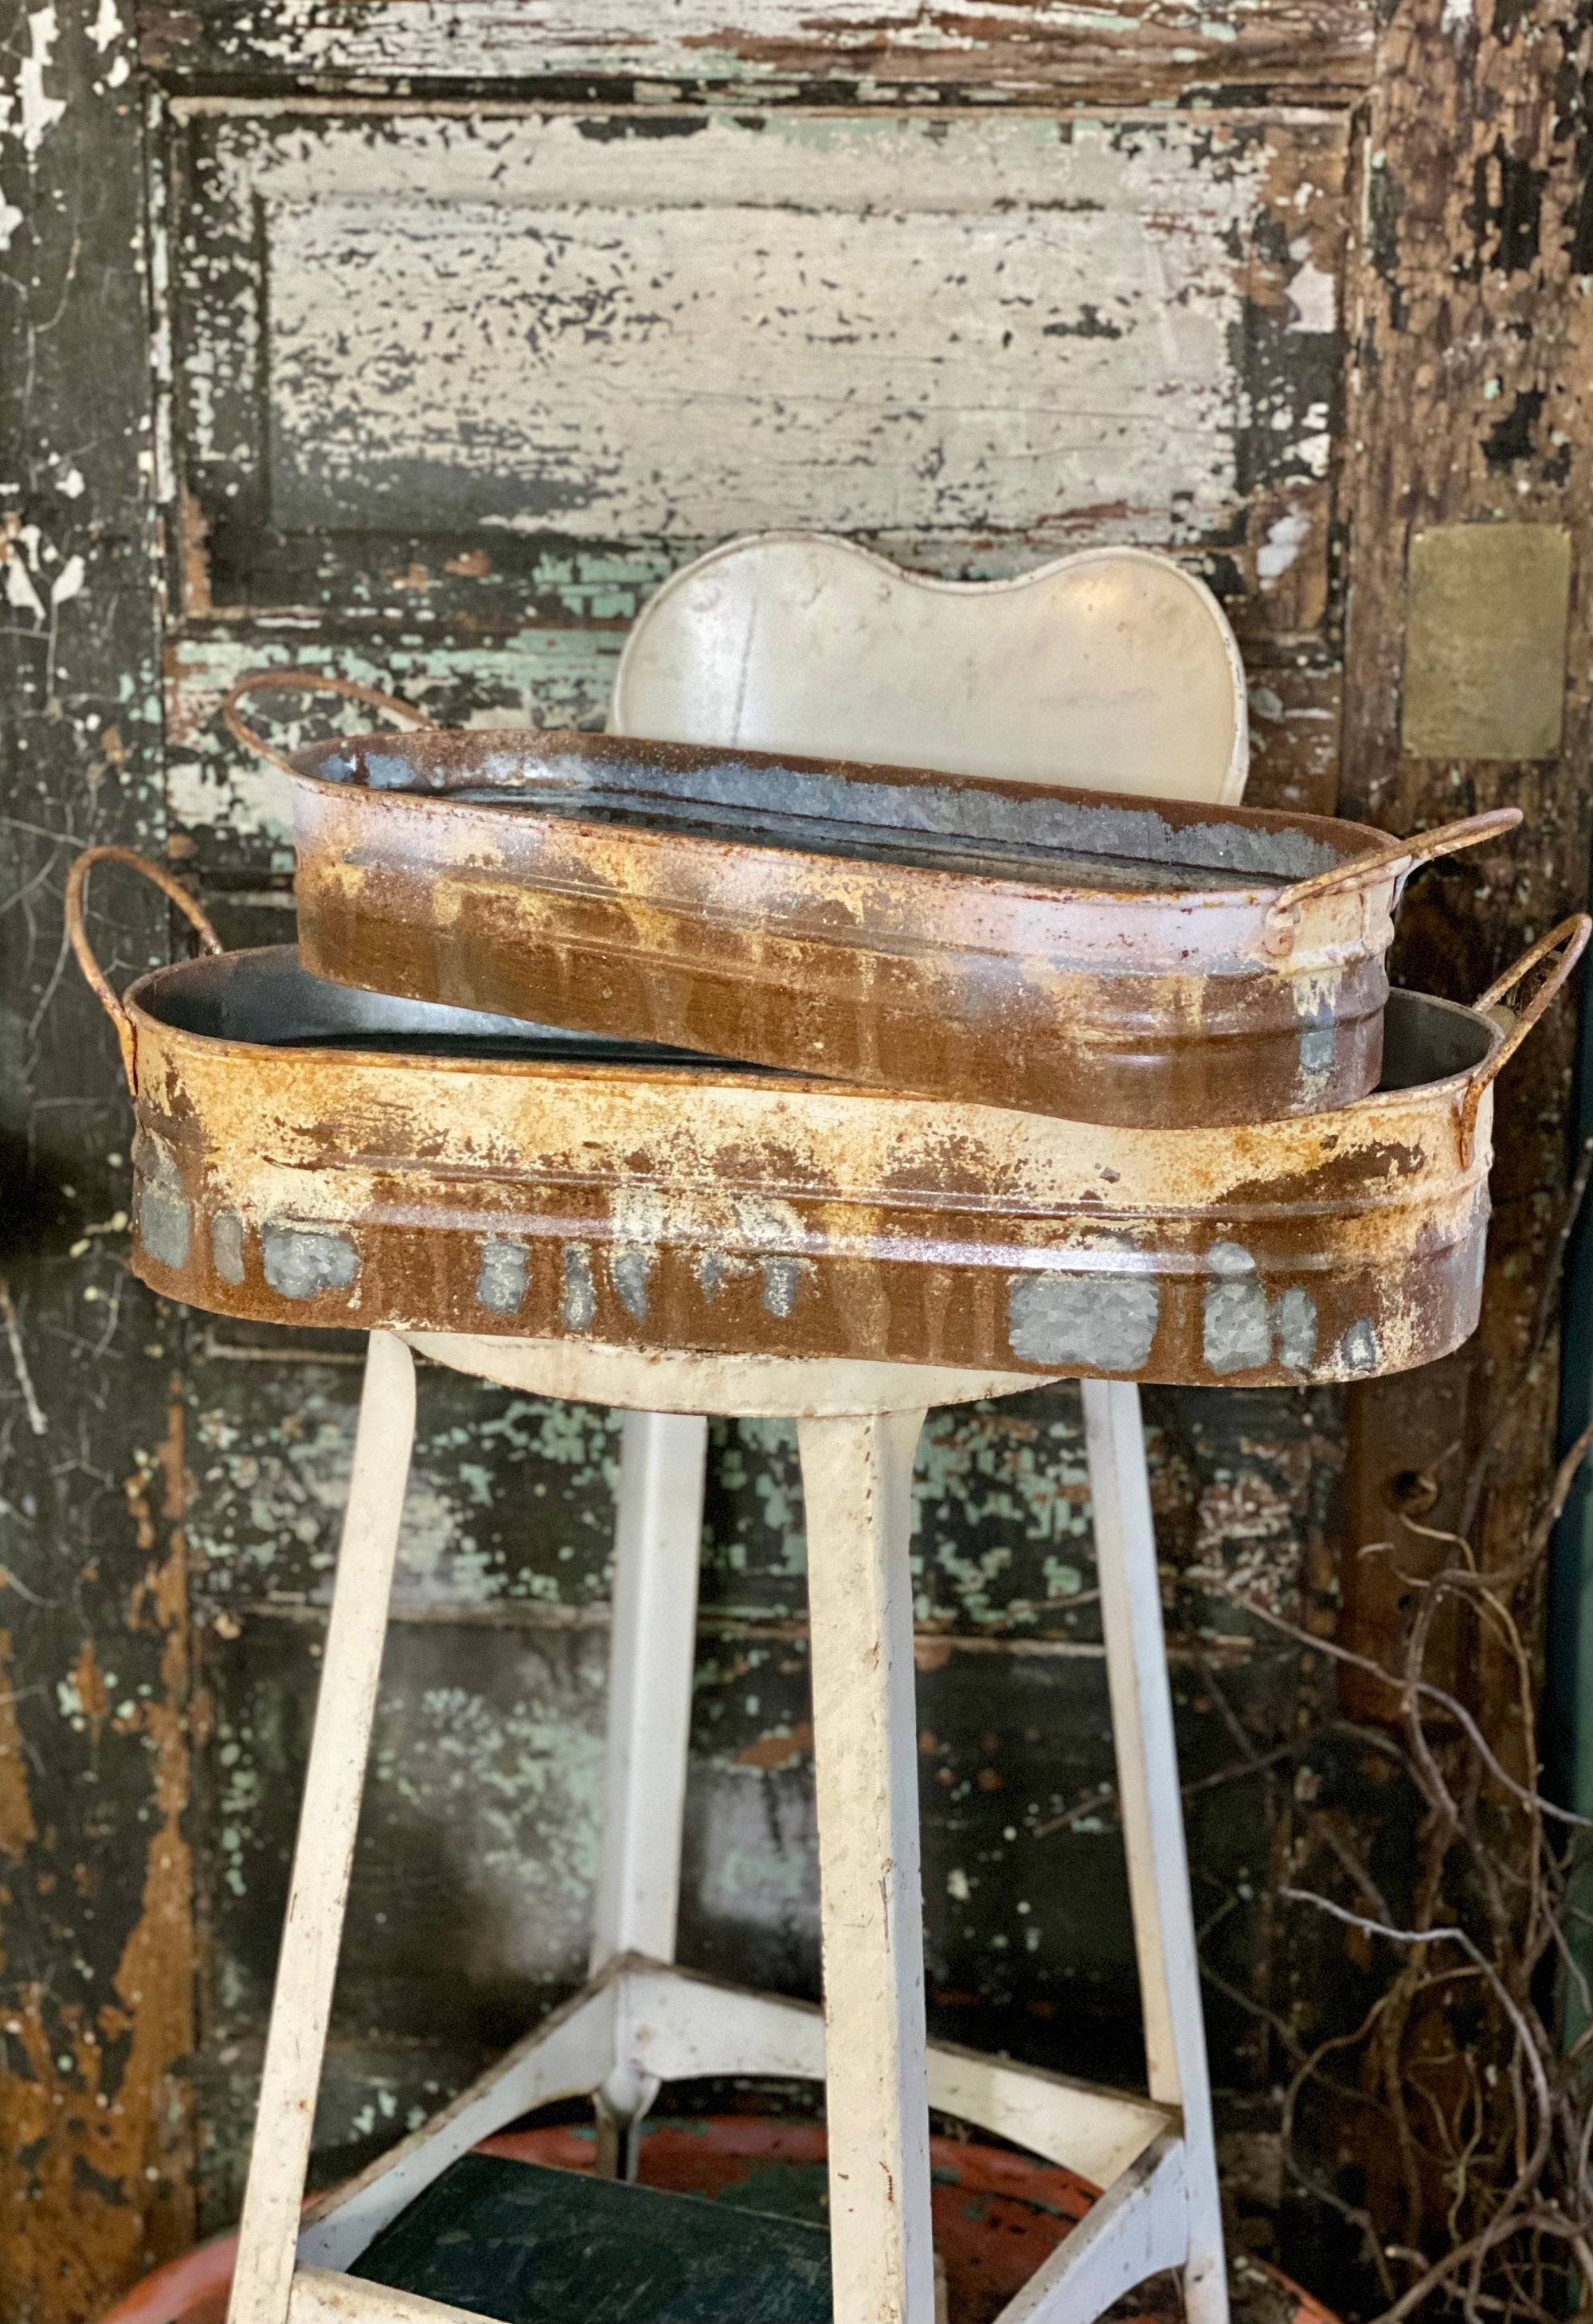 Galvanized Whitewash Rusted Oblong Metal Trug, Farmhouse distressed vintage look container, Large metal planter, bulb planter, rustic decor